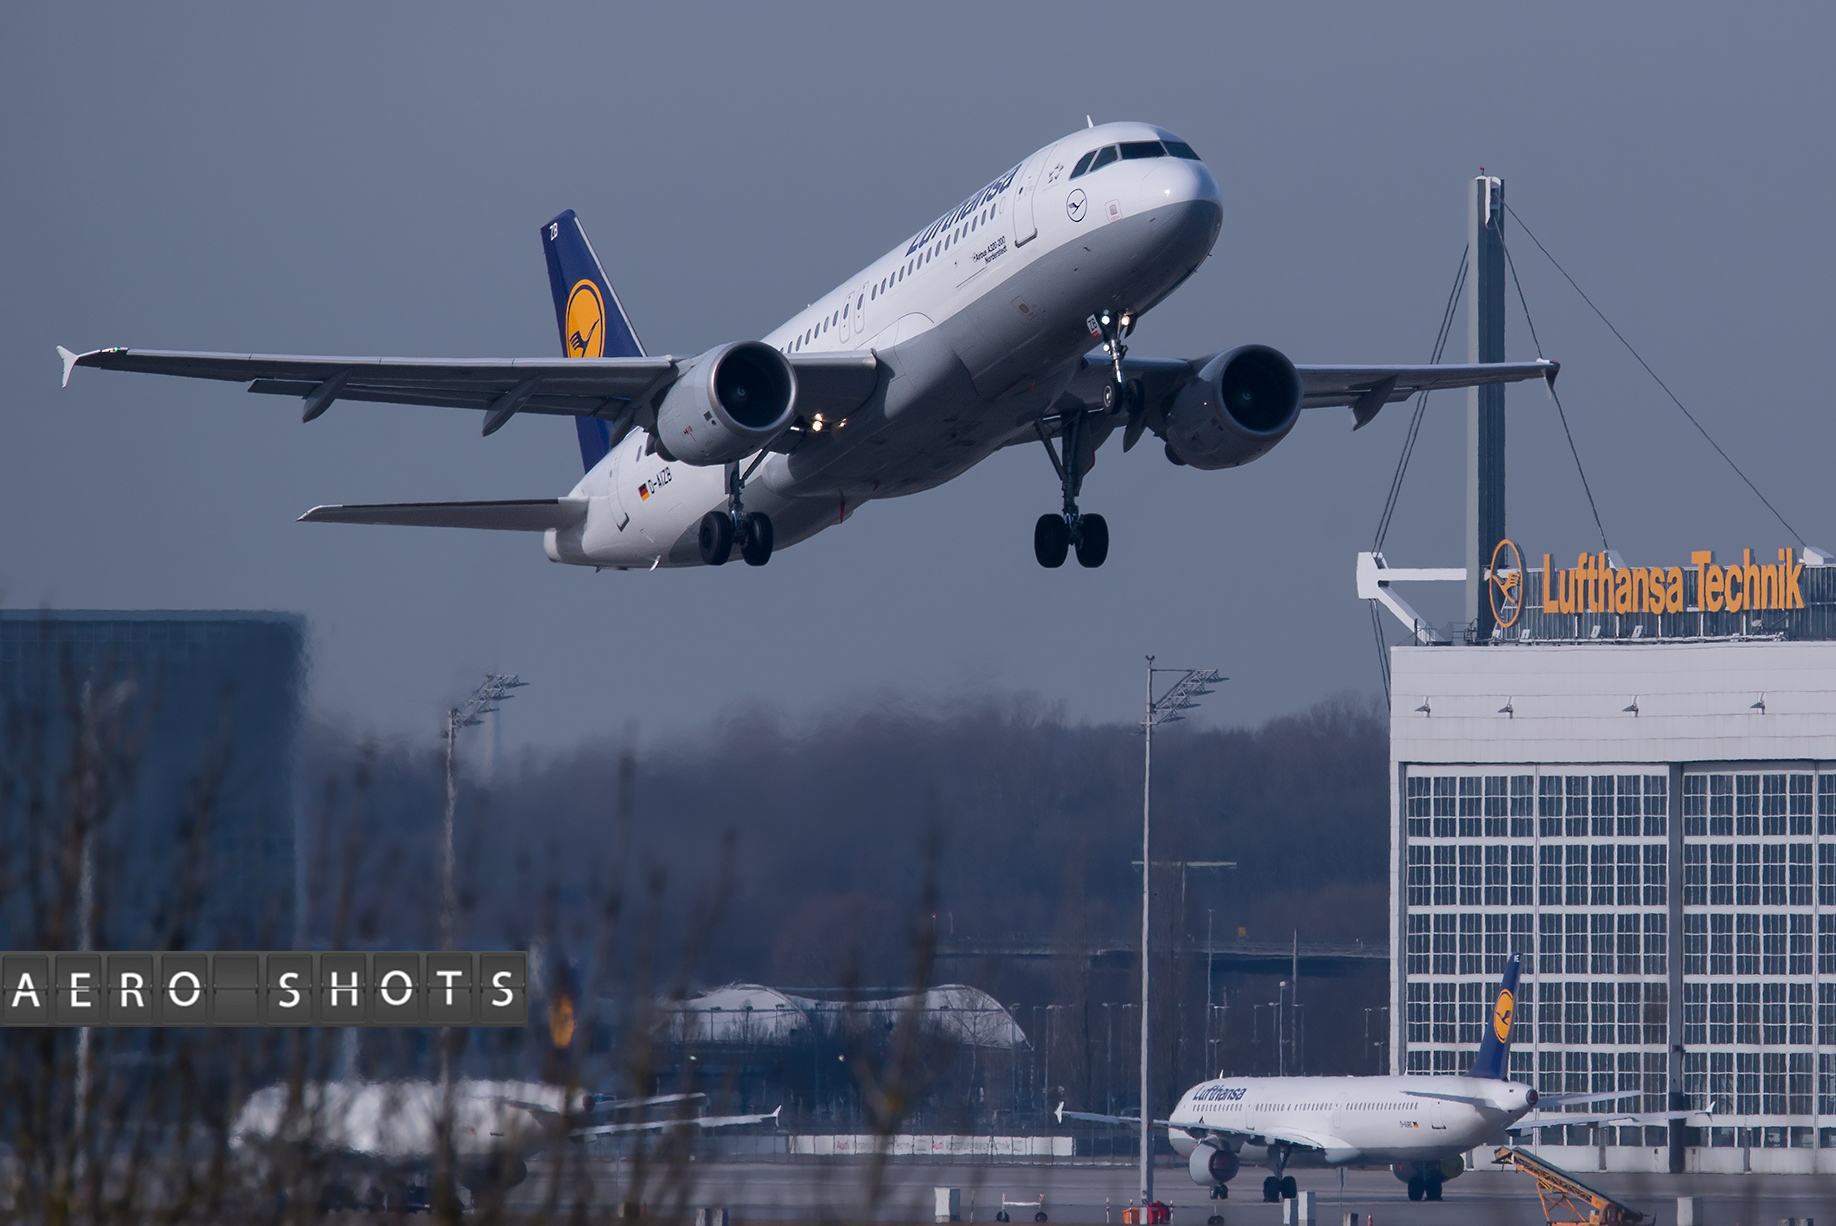 LH's A320 departs in front of the Technik hangars at Munich